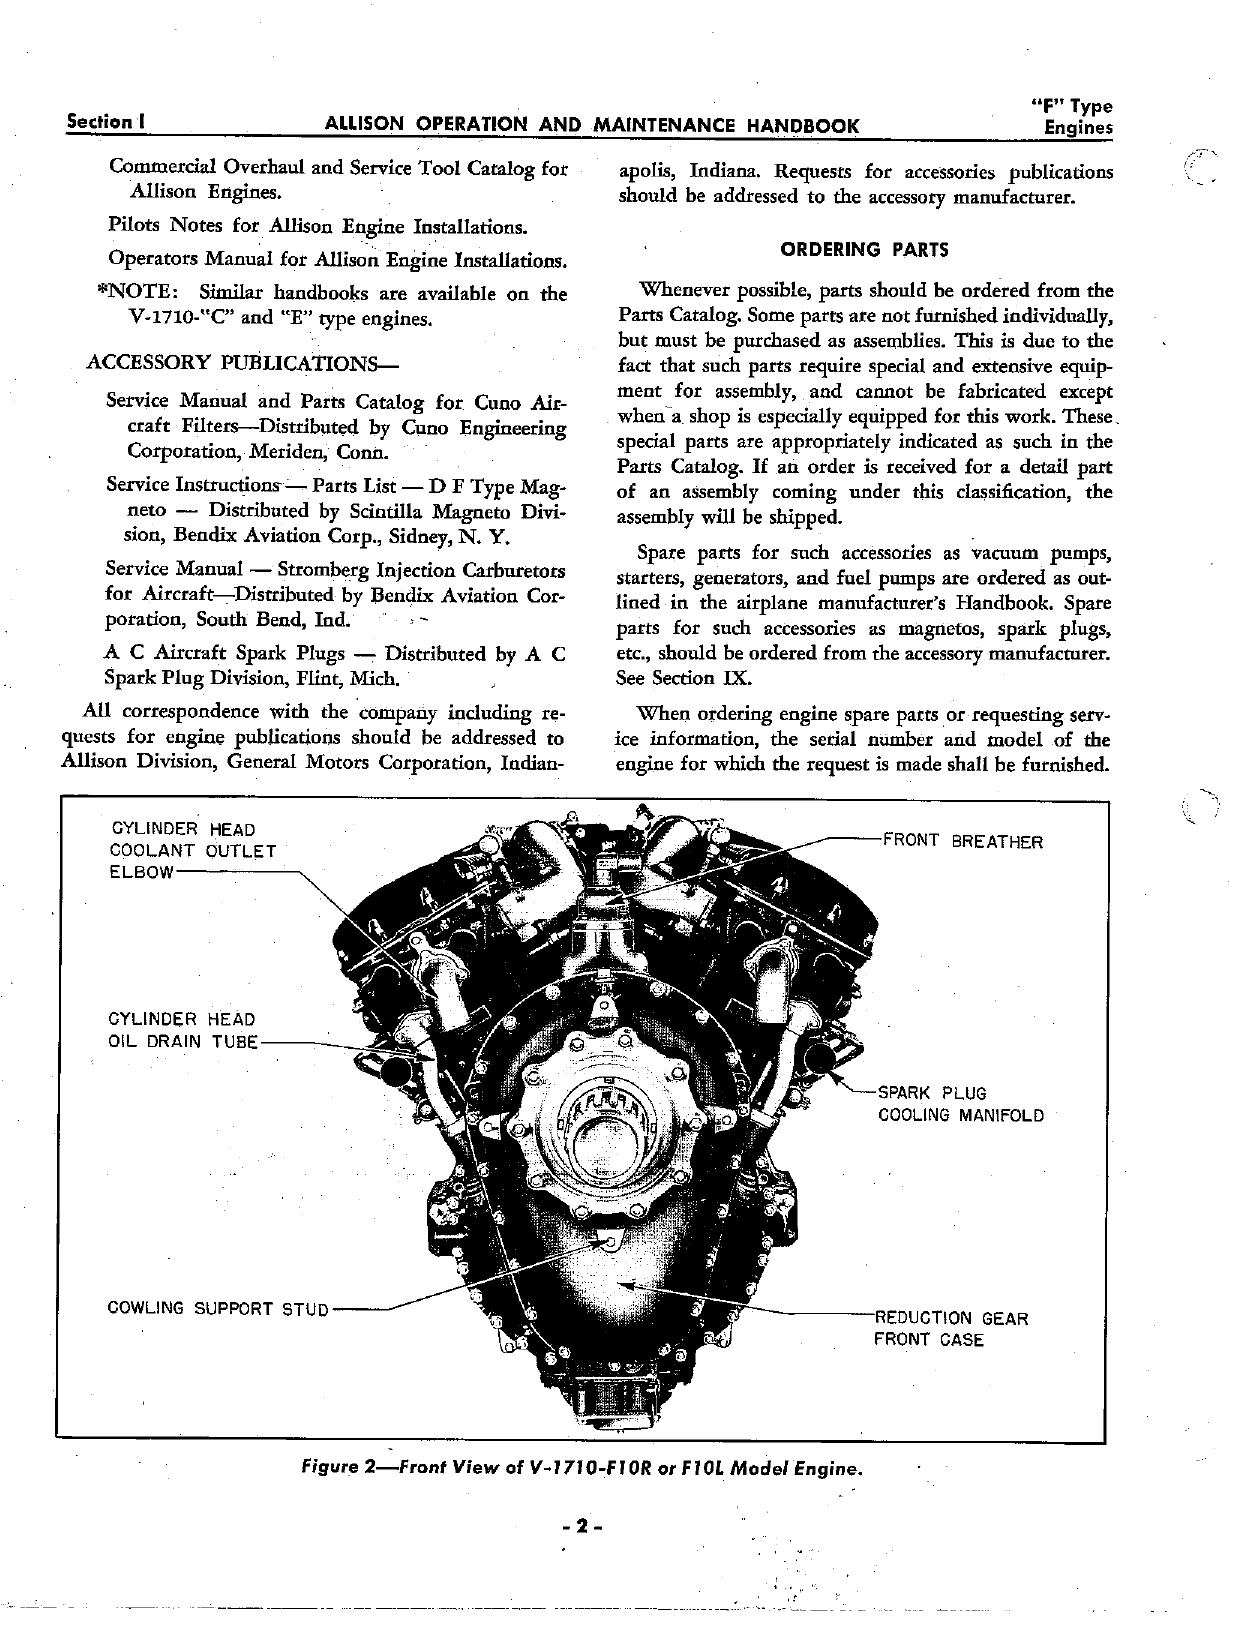 Sample page 8 from AirCorps Library document: Operation and Maintenance for Allison V-1710 F Type Engines - Third Edition